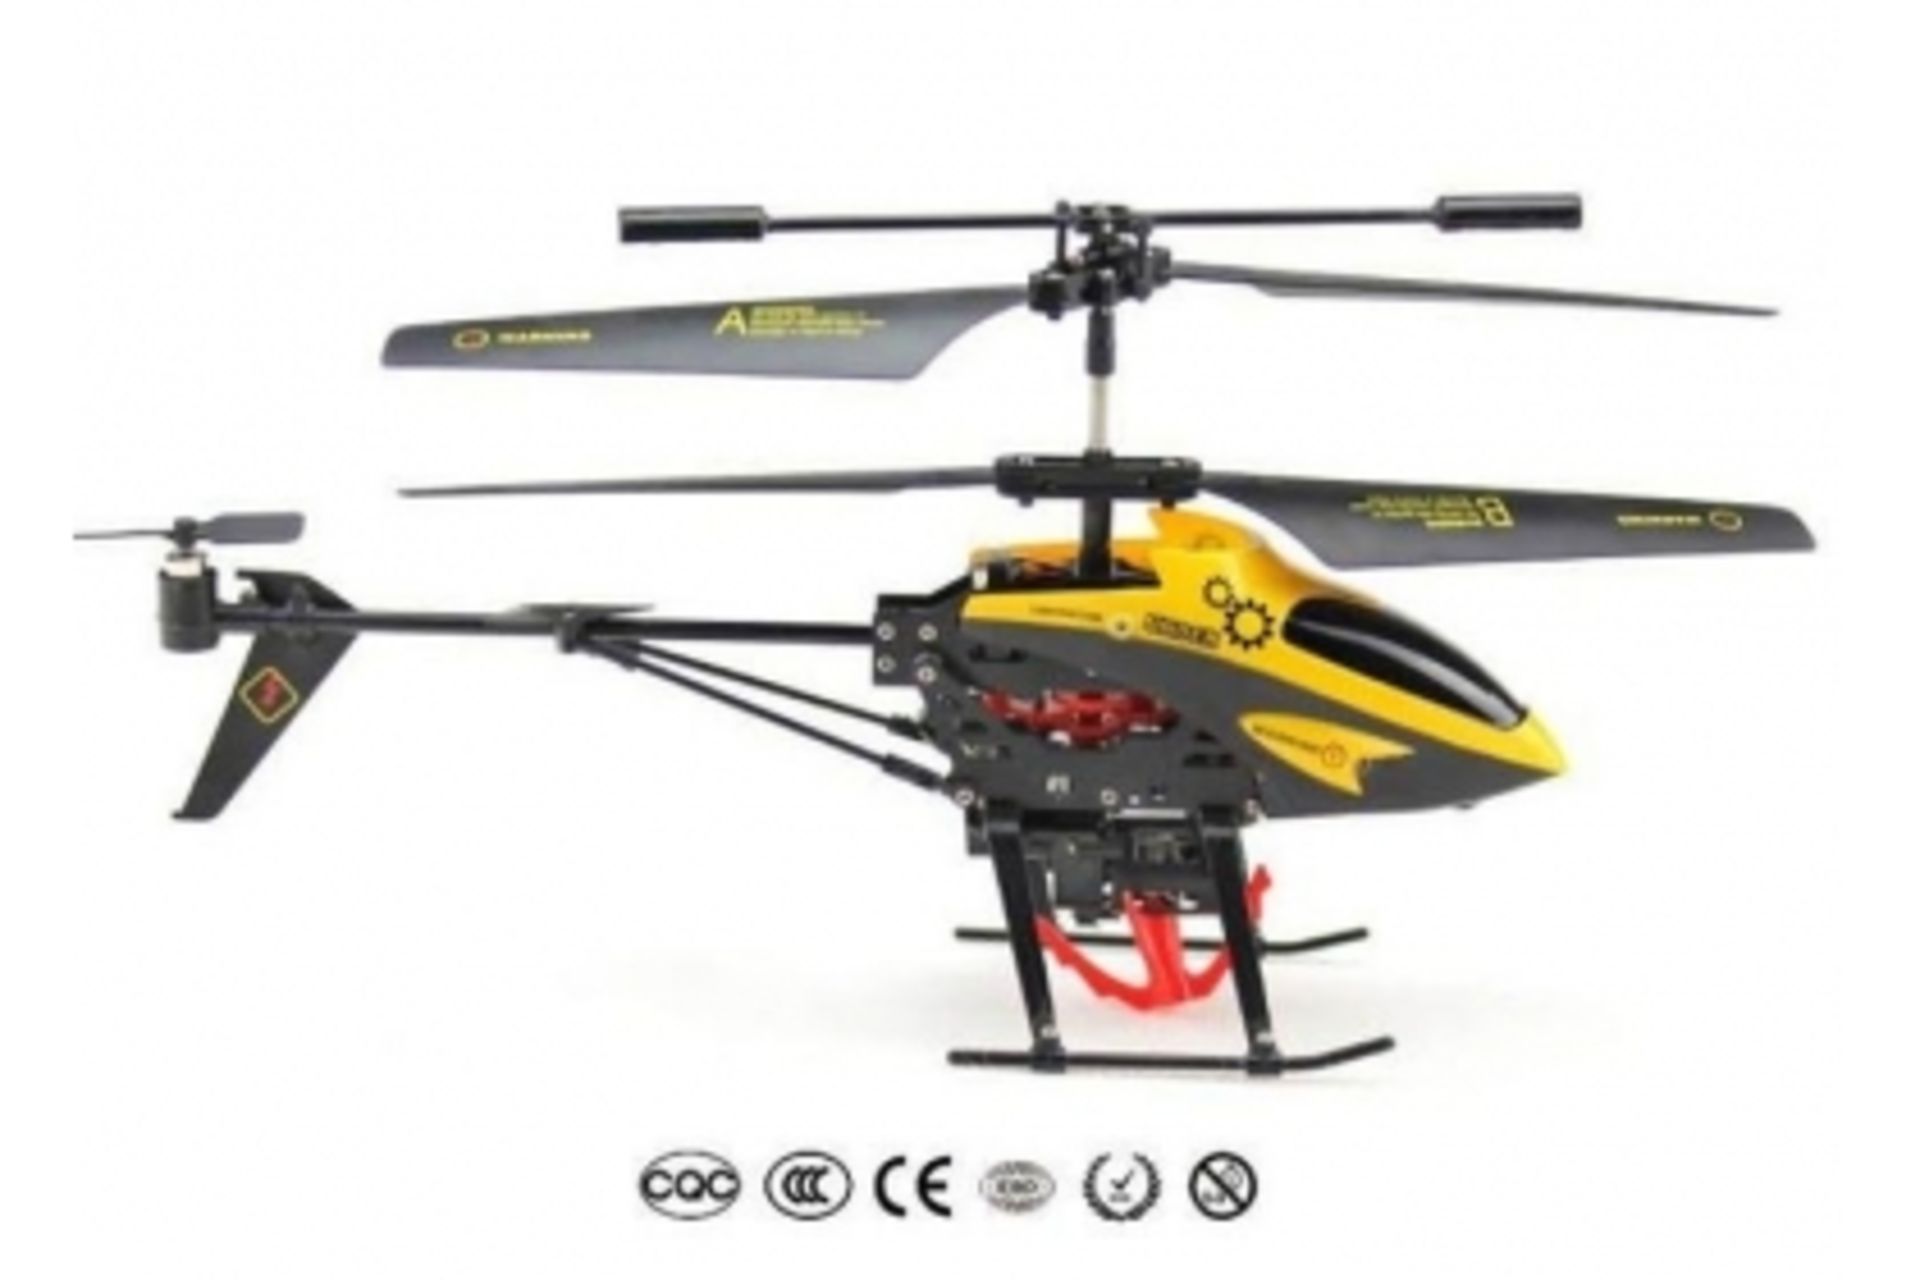 V Infrared controlled Cargo Helicopter RRP £79.99 With 3-channel gyro and trim active technology. - Image 5 of 6